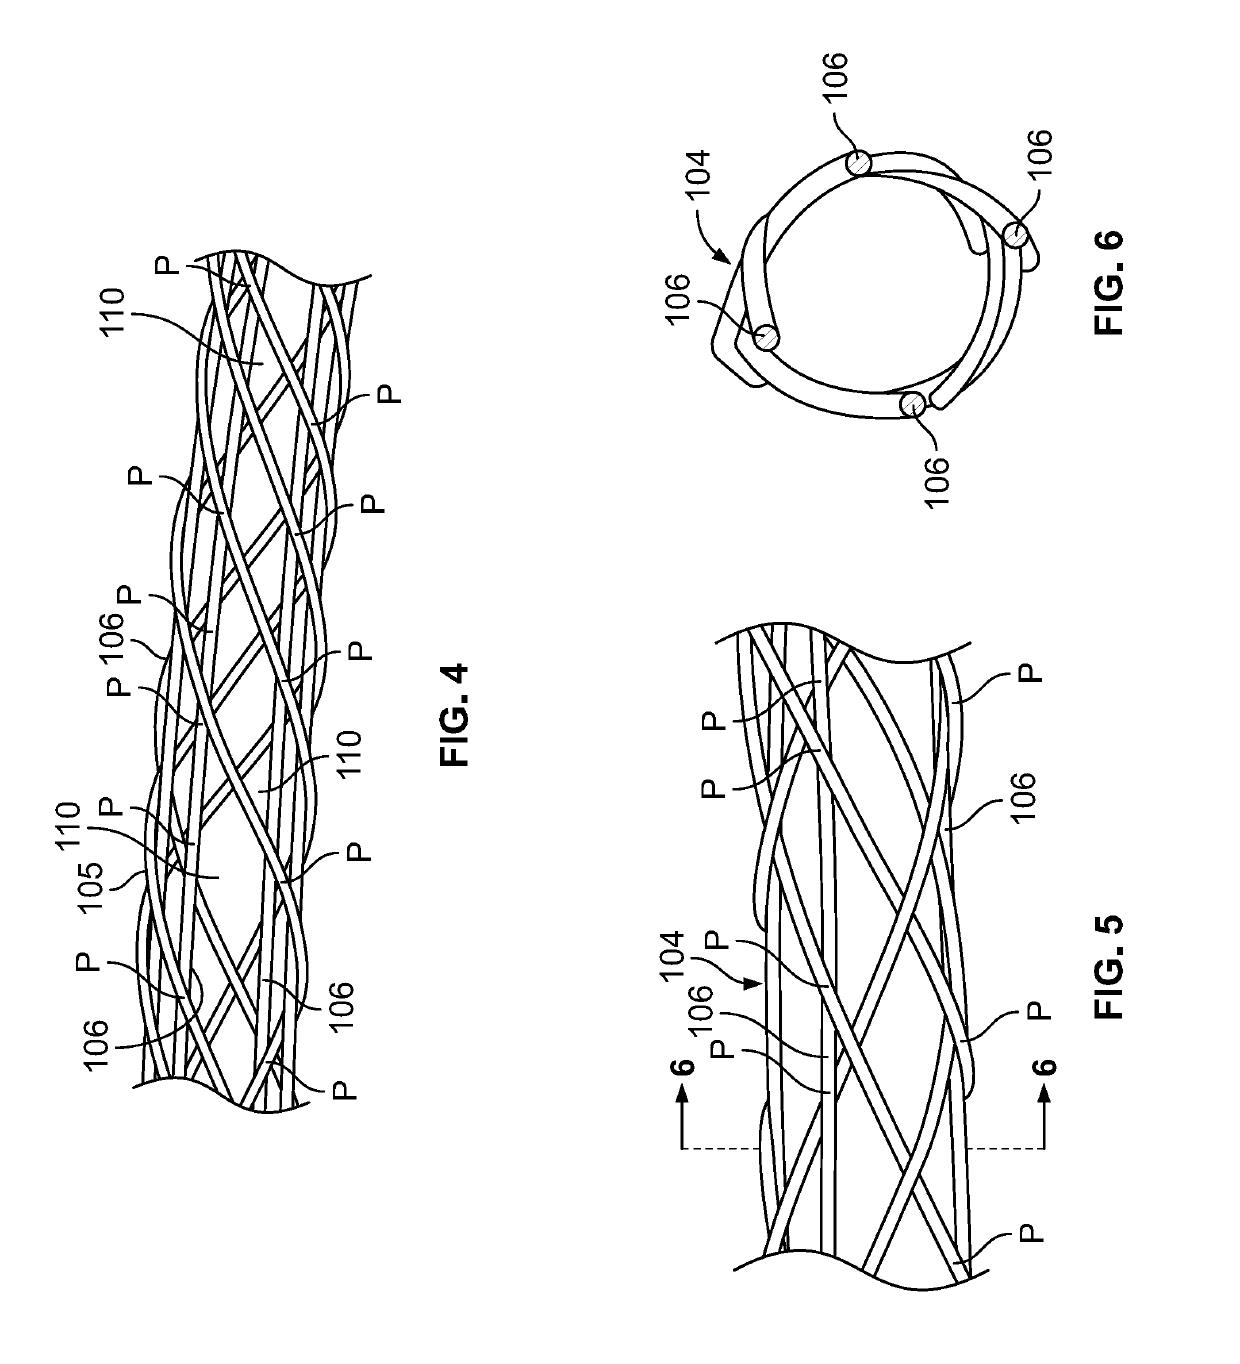 Indirect attachment of a needle to a mesh suture